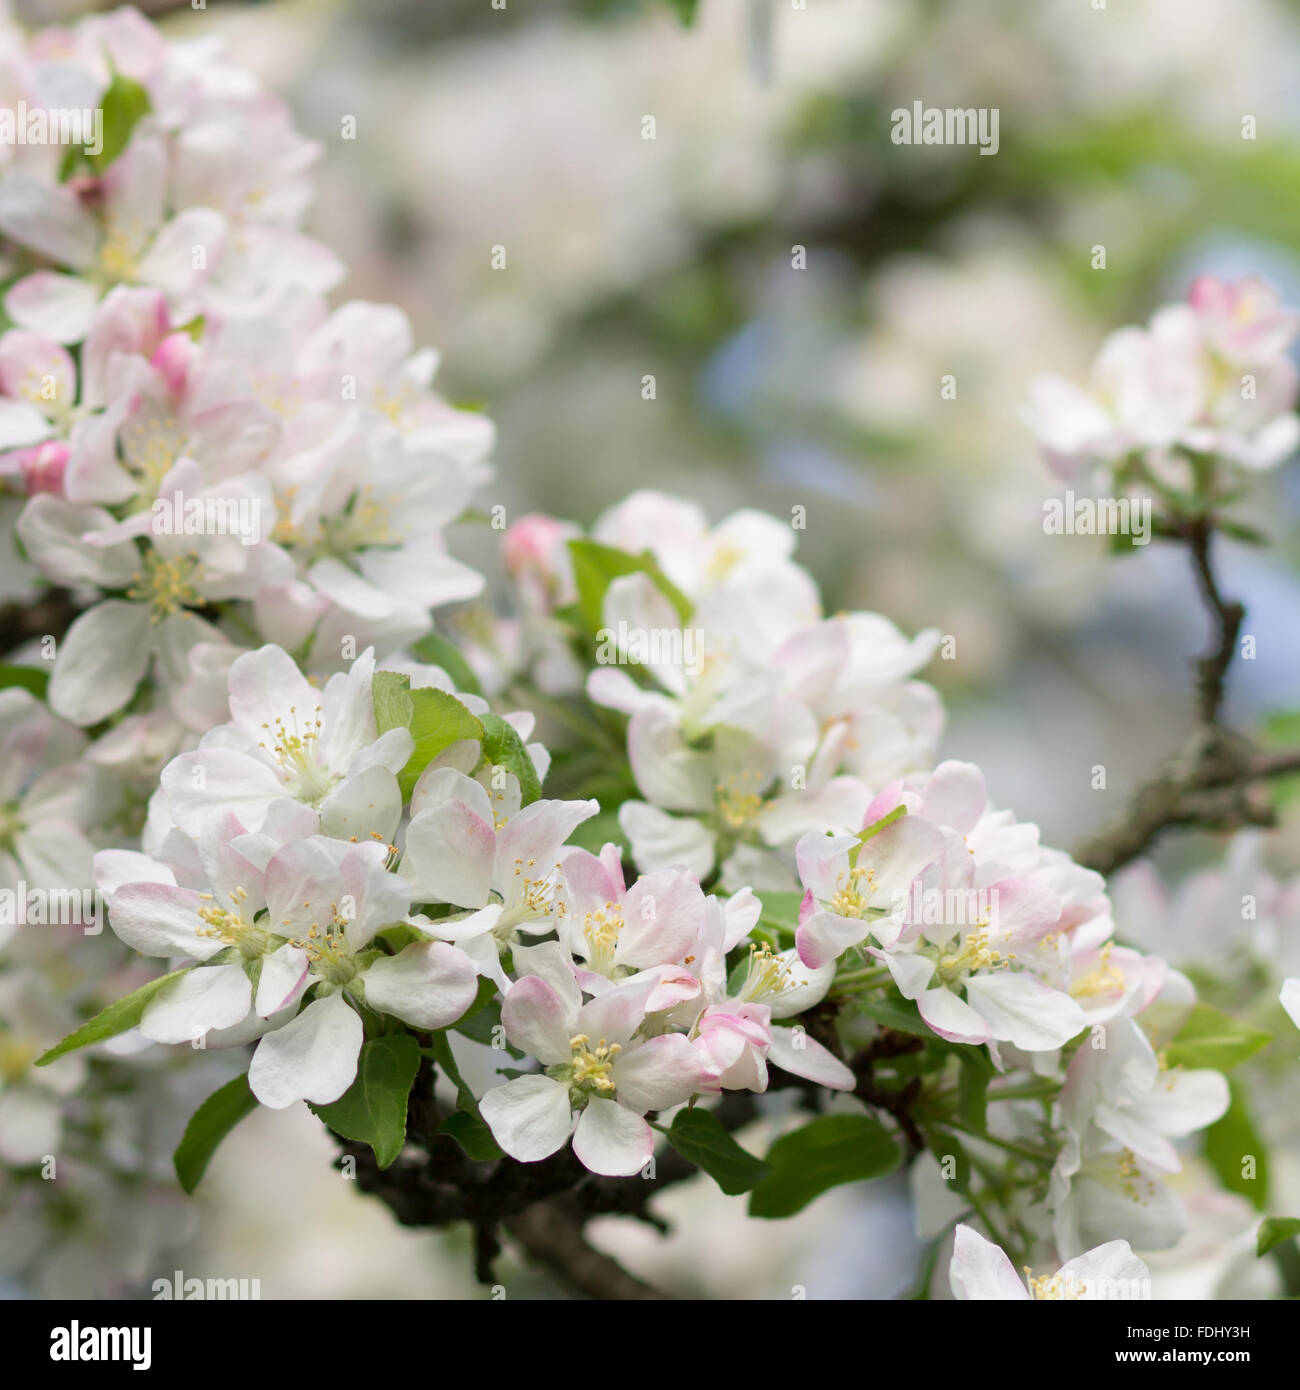 Blossoming apple tree twig with white flowers. Spring fruit tree blooming background Stock Photo